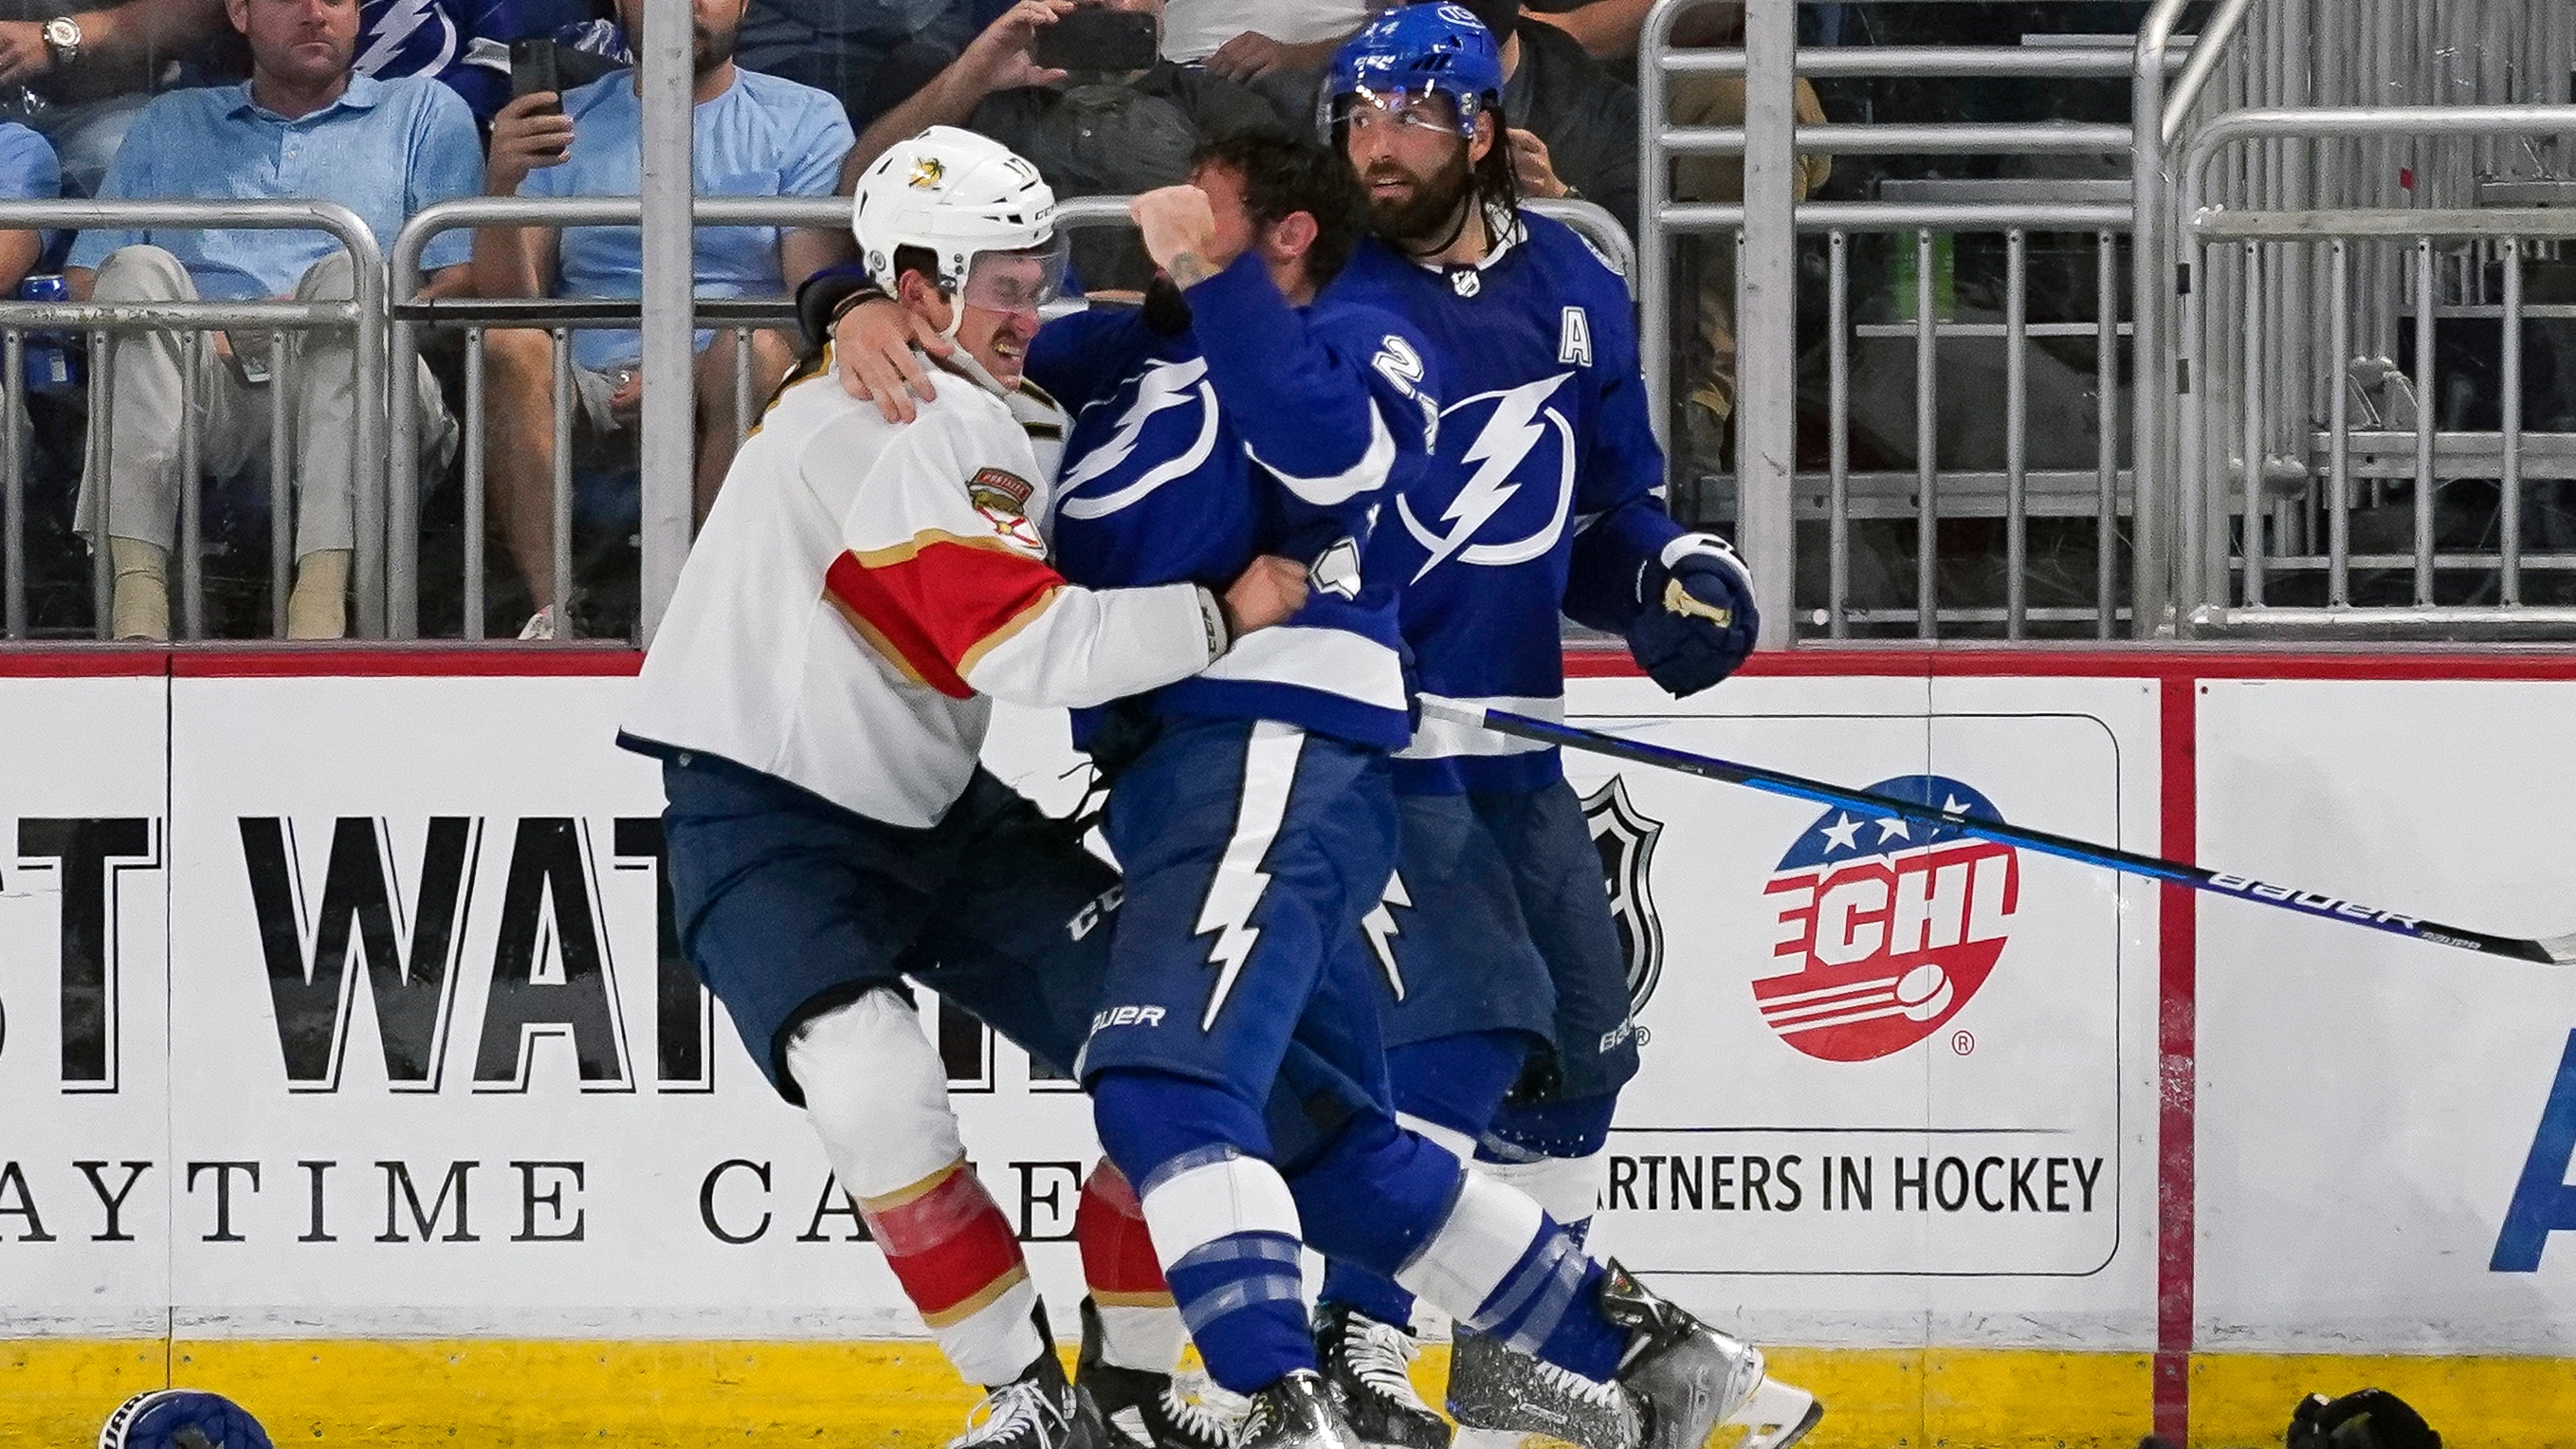 My Collection 2023 Edition: Tampa Bay Lightning 